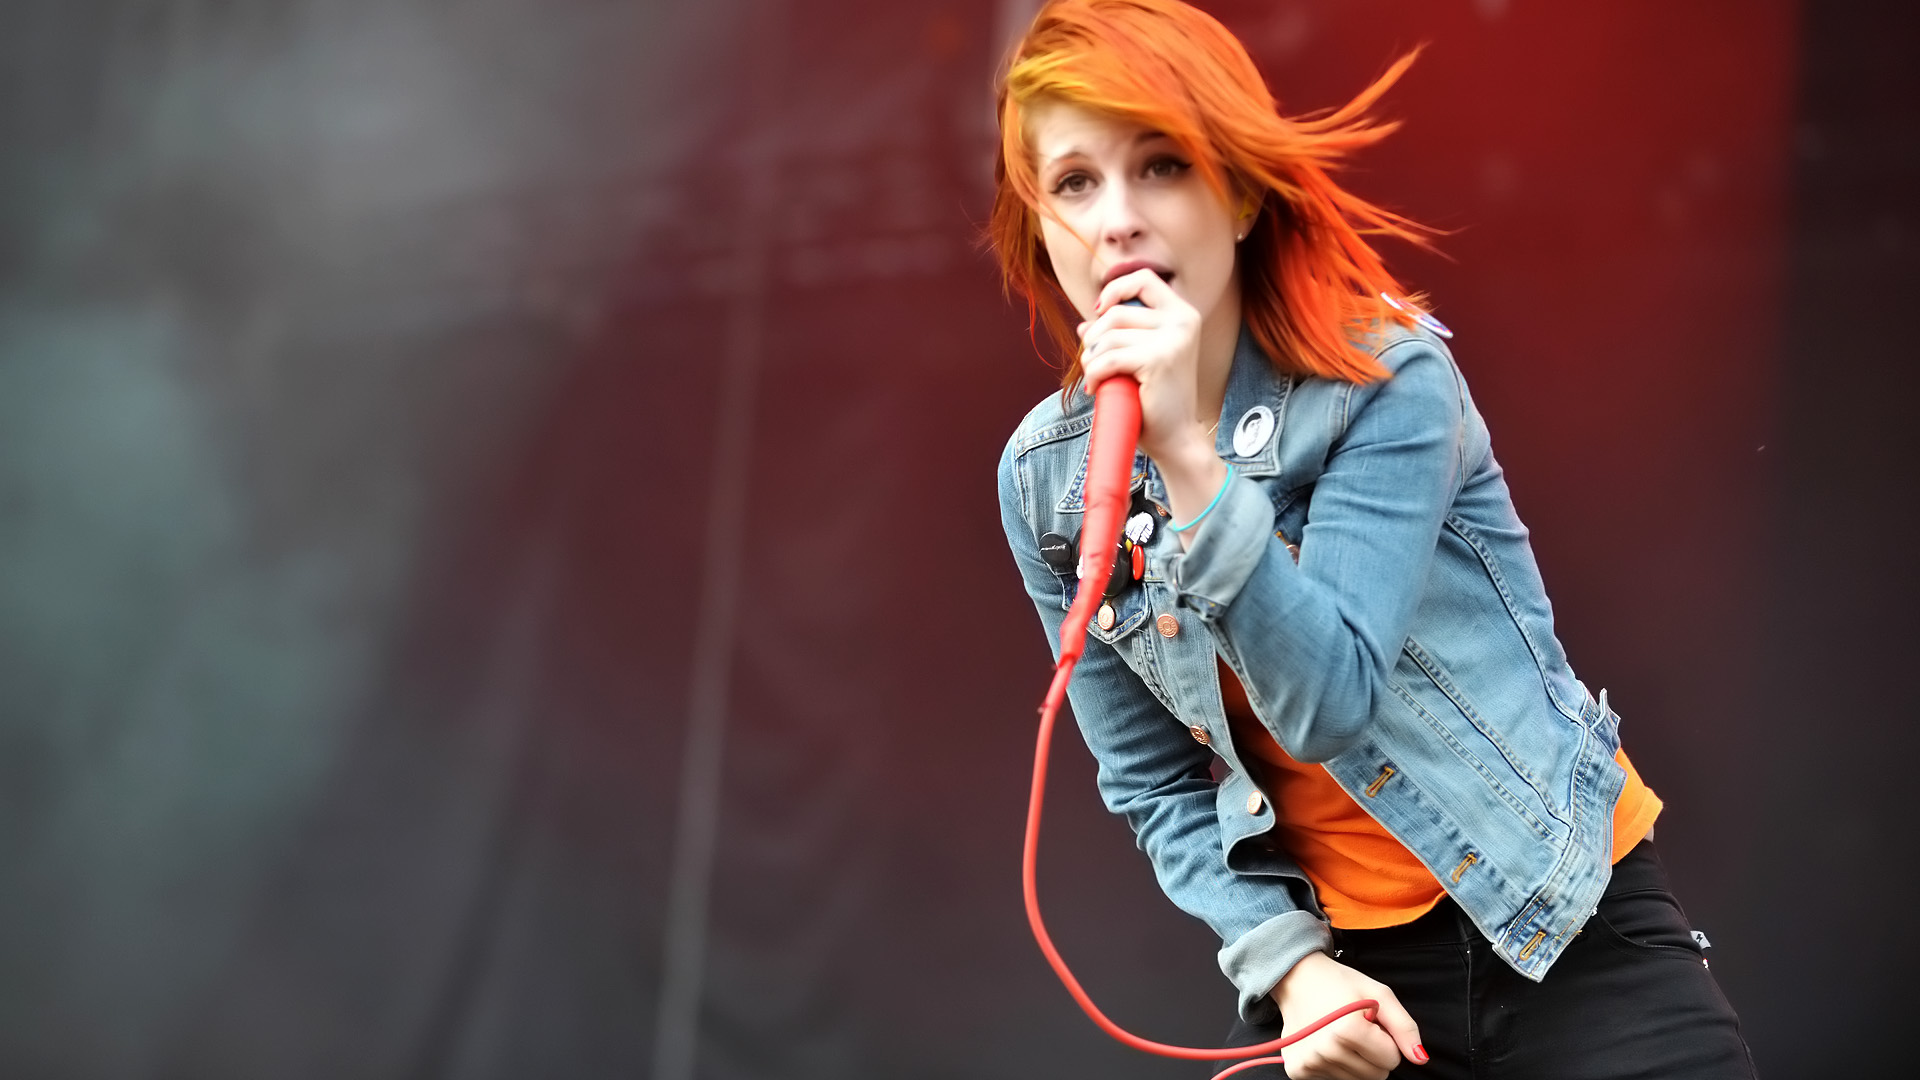 Paramore redhead hayley williams women face 1080P 2K 4K 5K HD wallpapers  free download  Wallpaper Flare